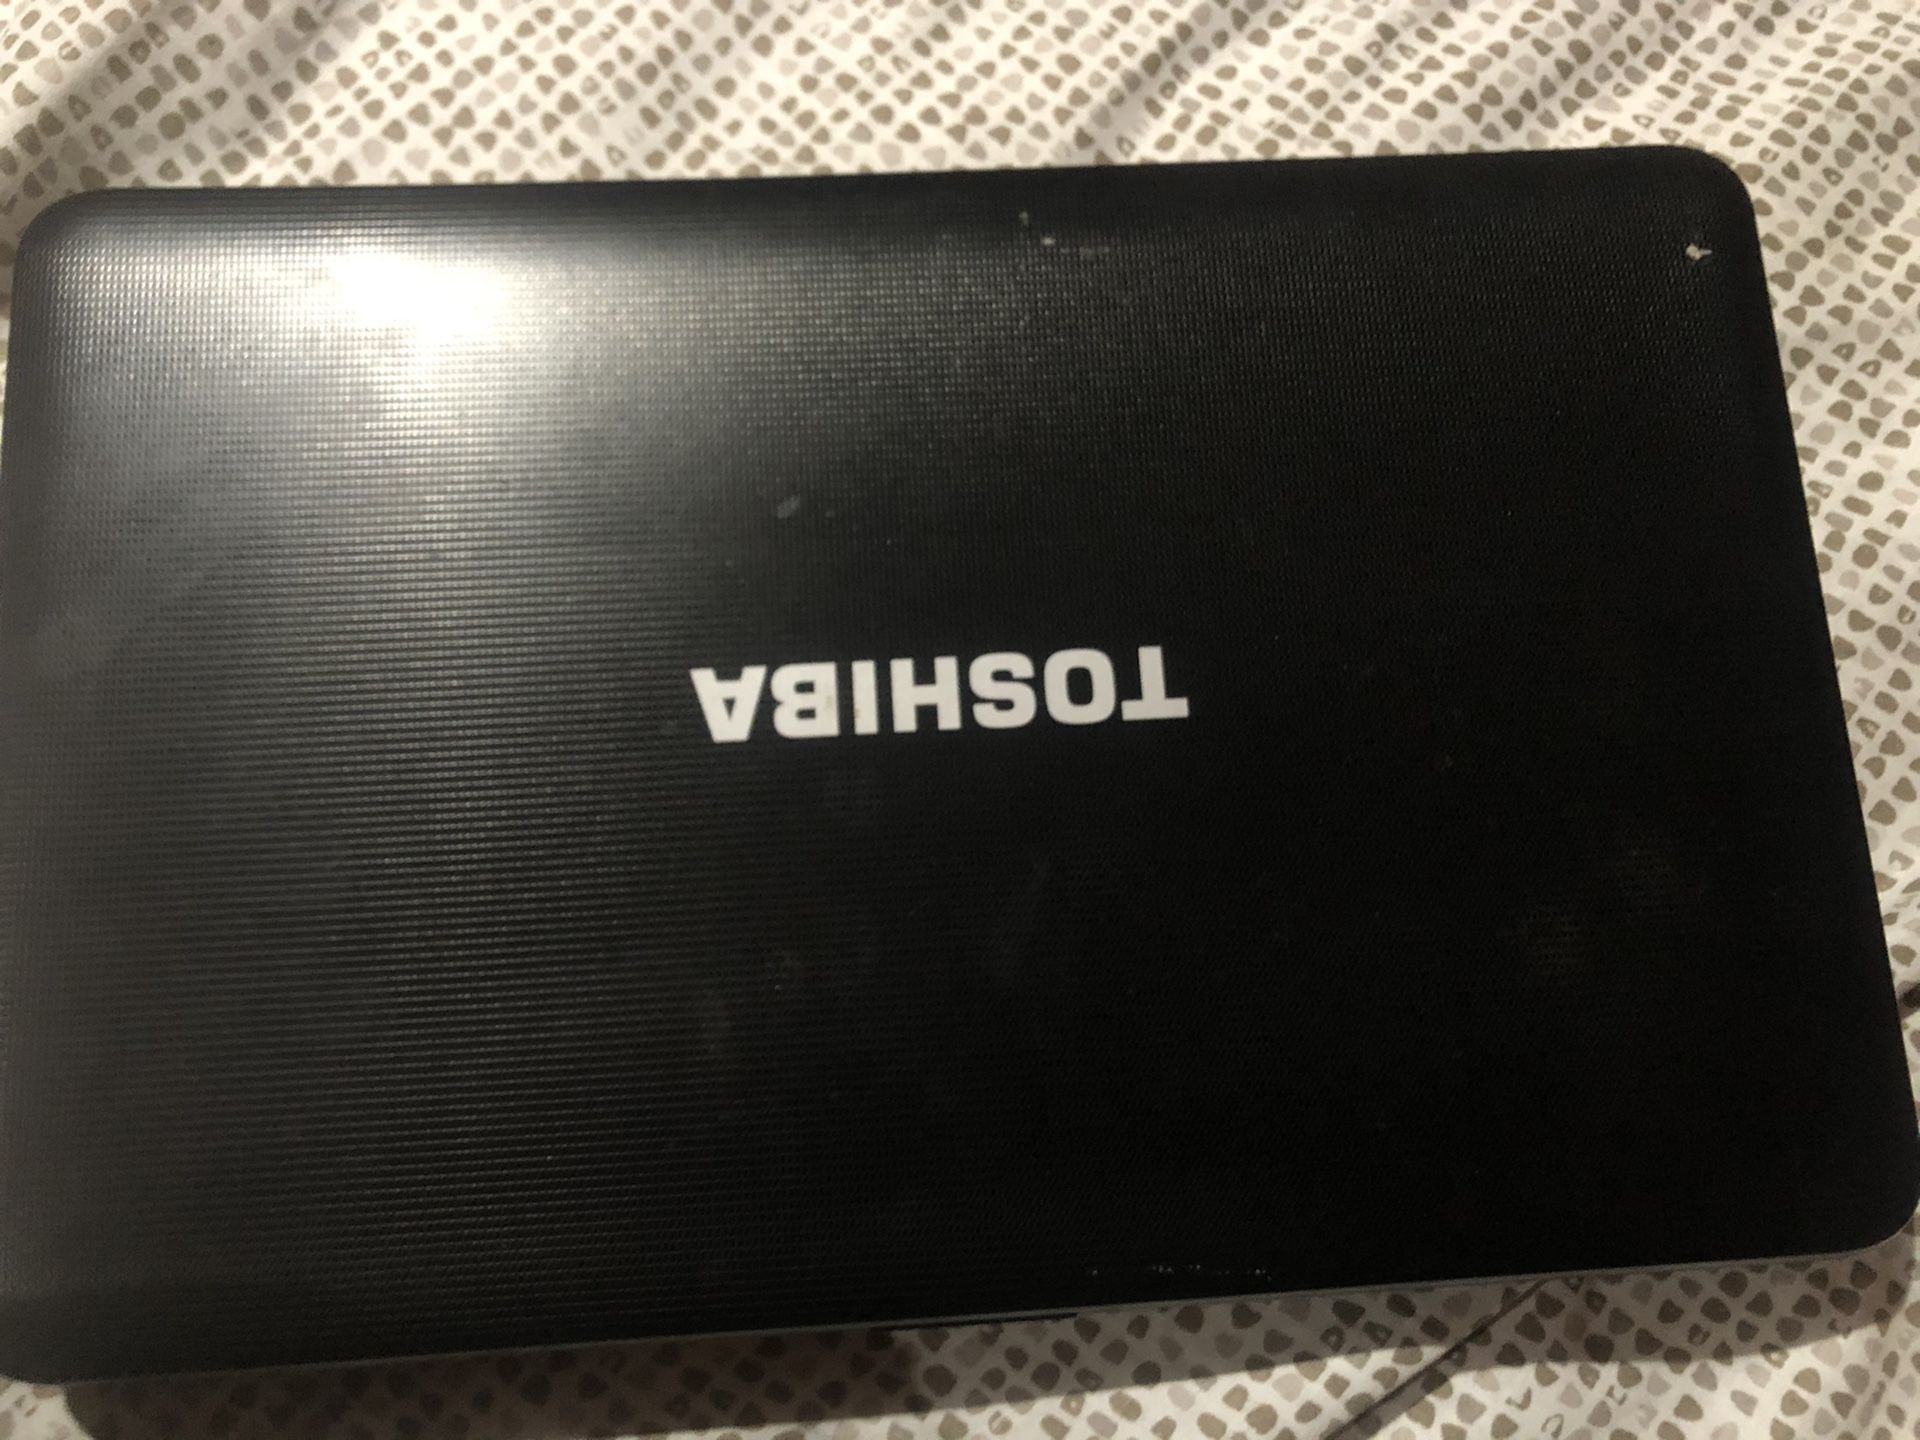 Toshiba laptop (only for parts)